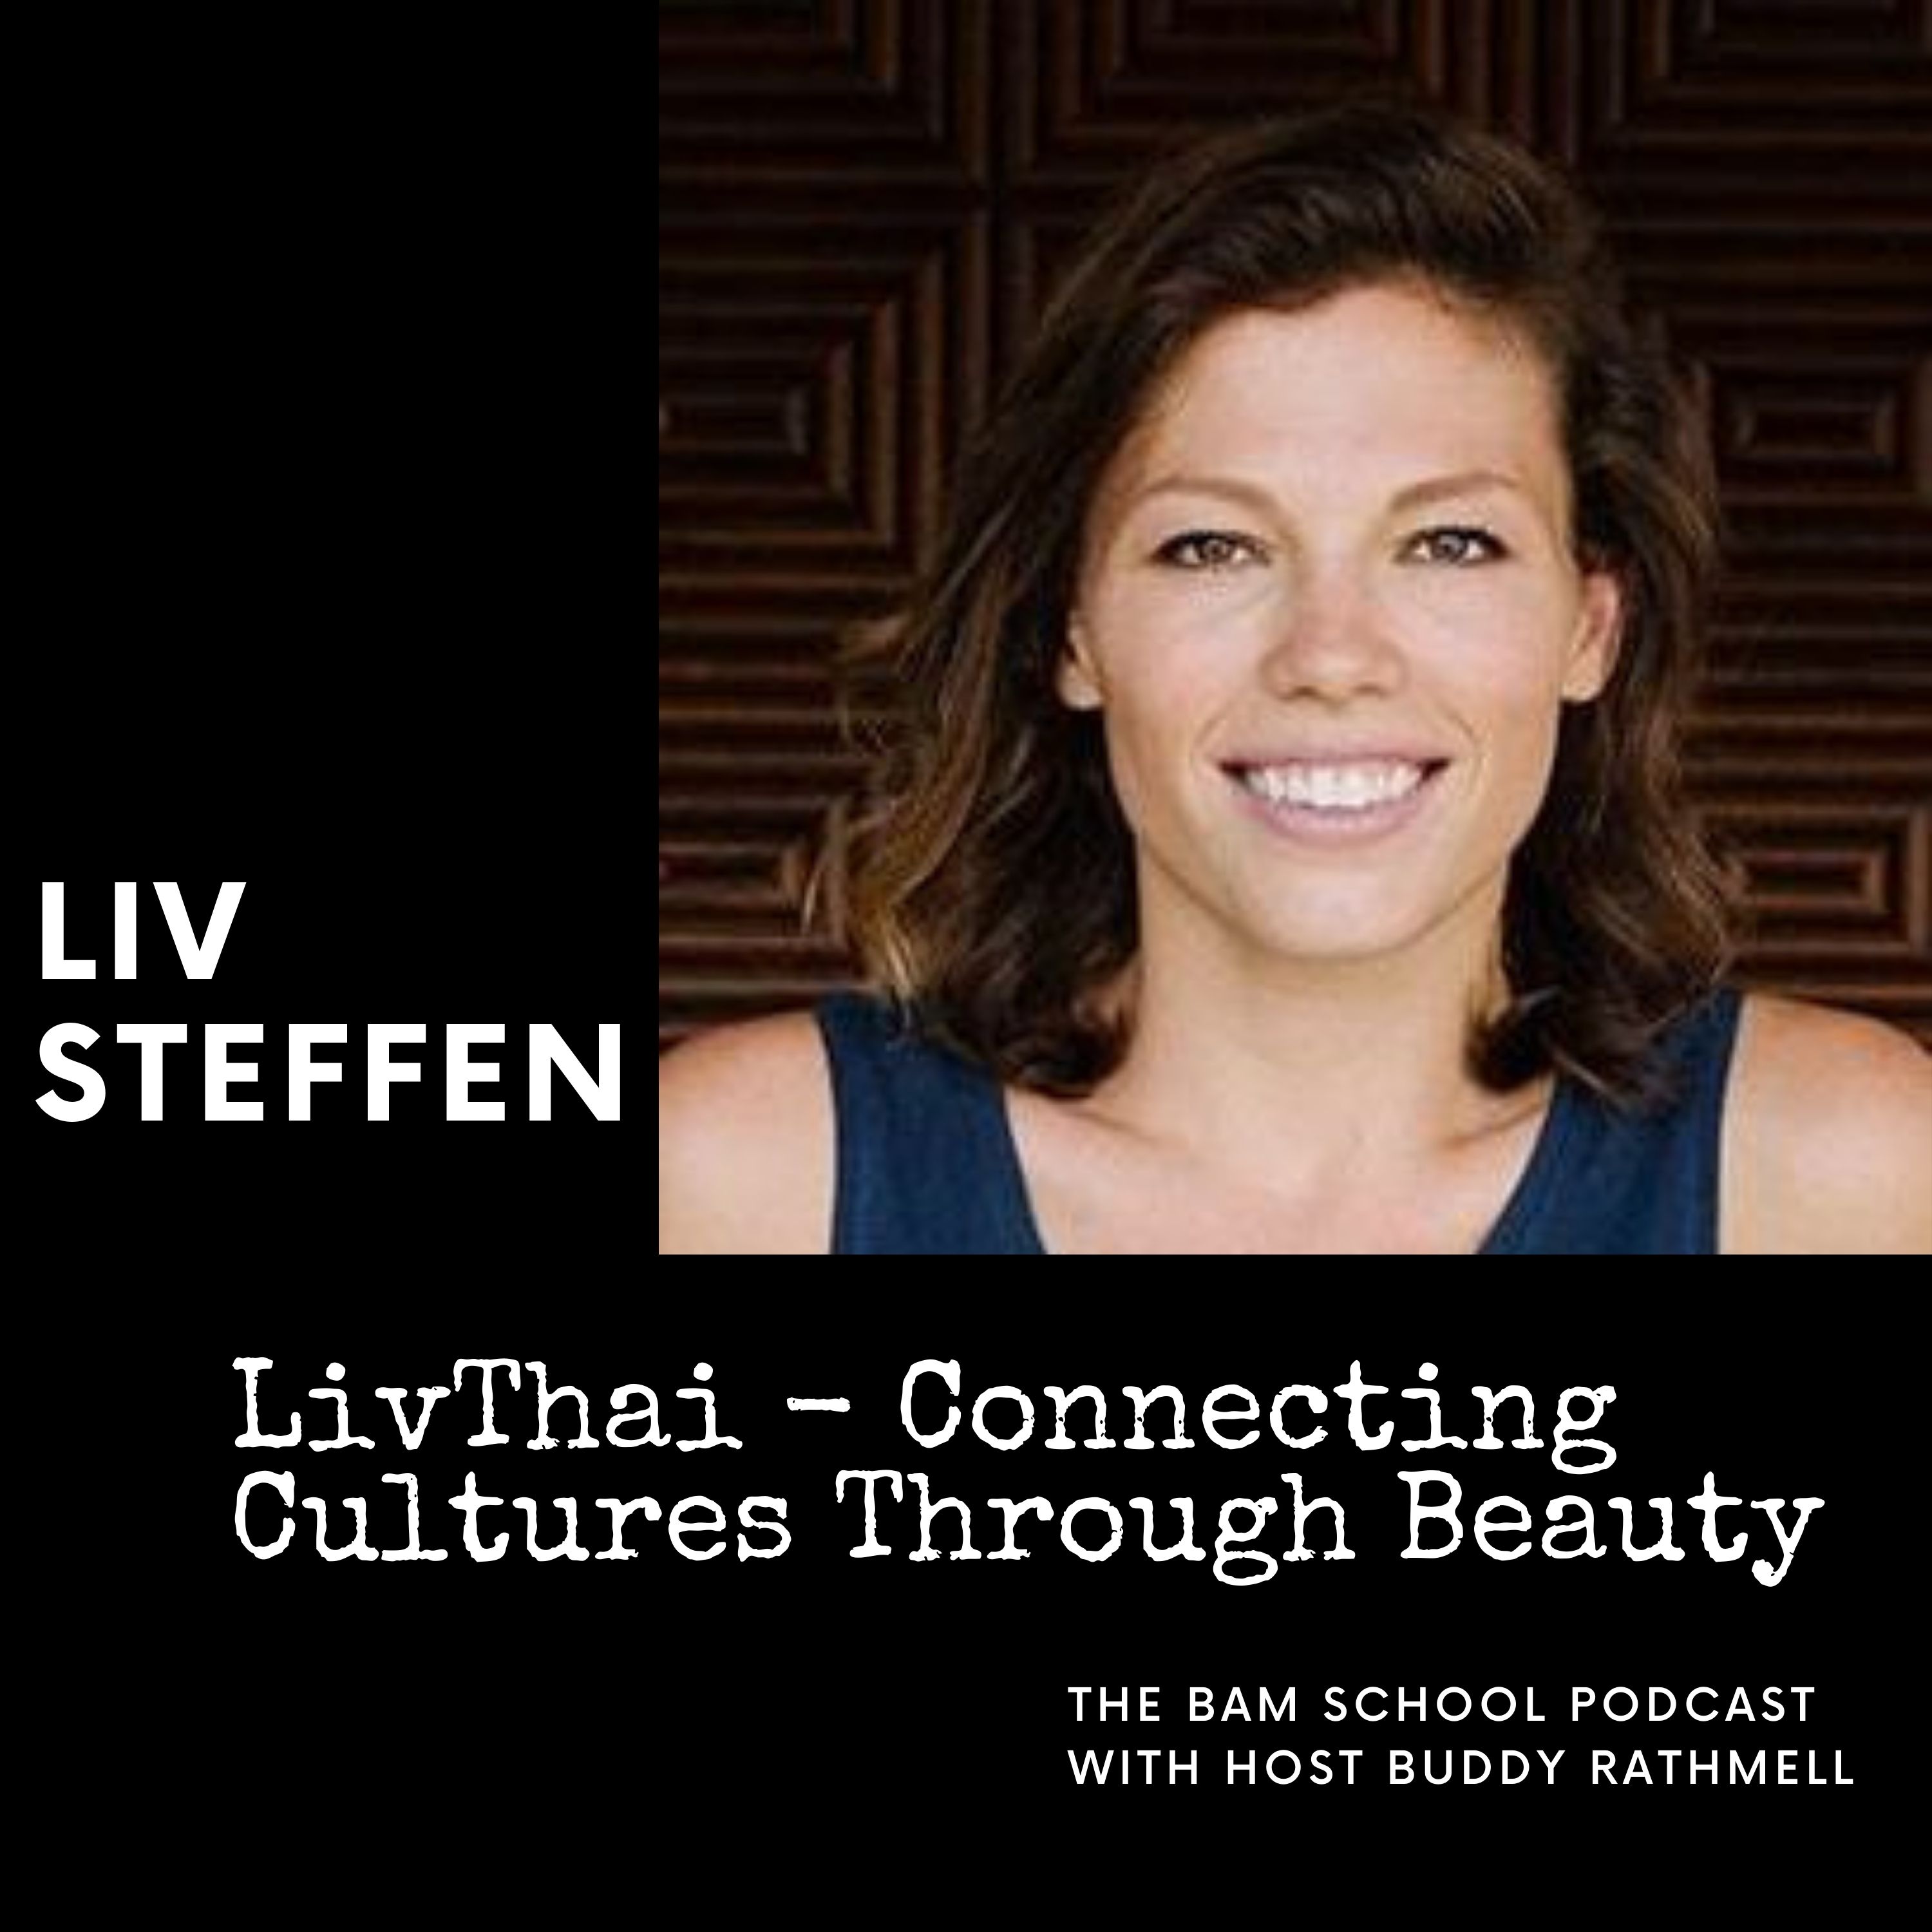 Connecting Cultures Through Beauty - Liv shares about her adventure launching her own Business as Mission project